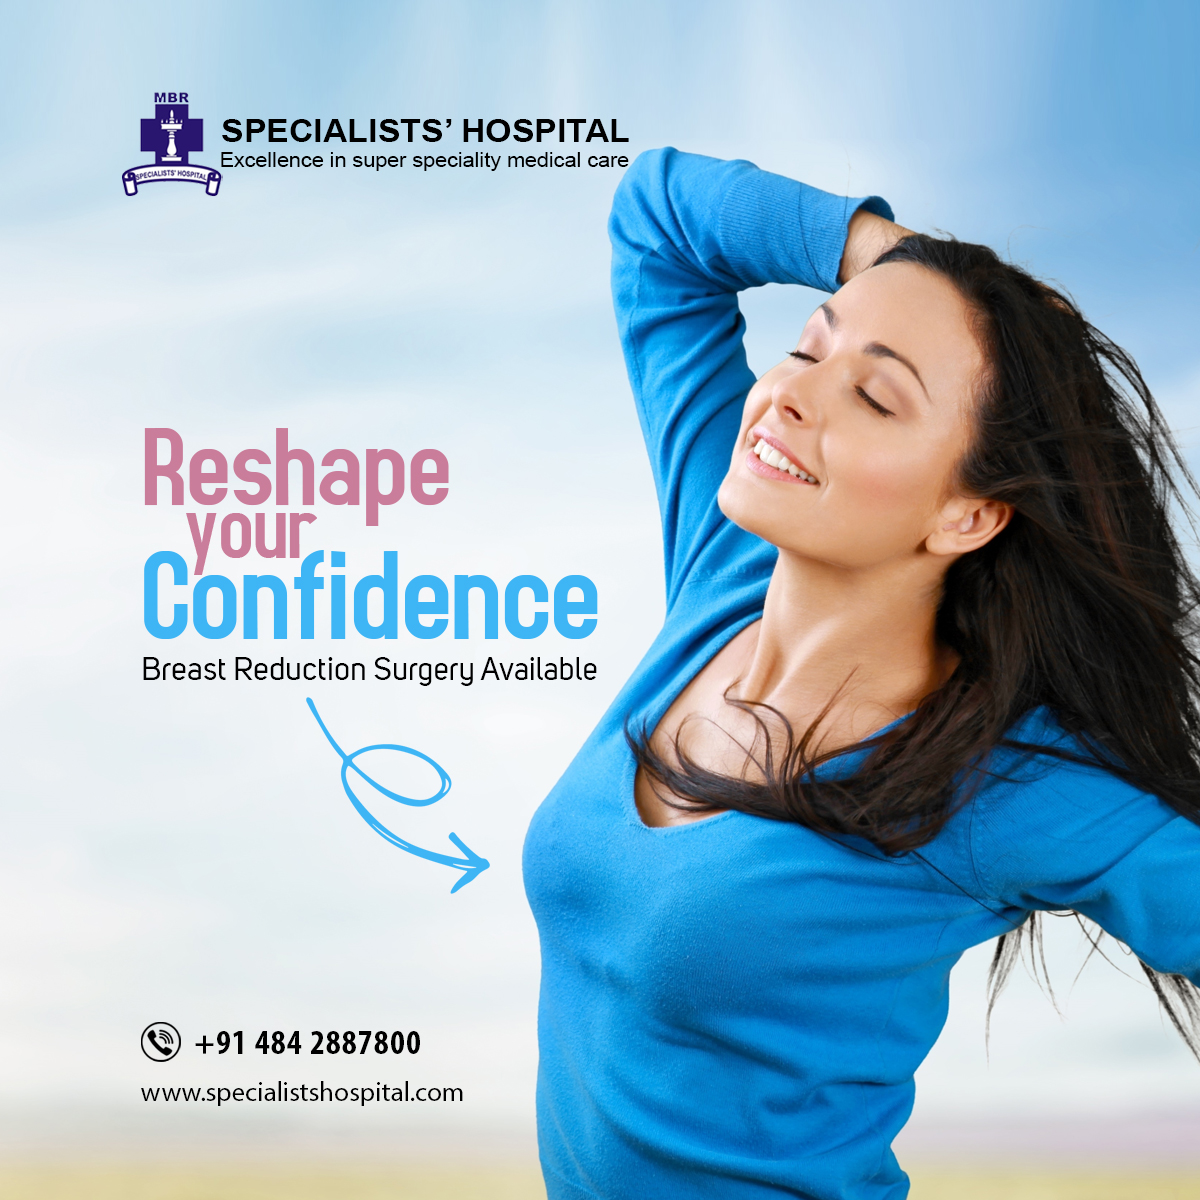 Many women with overly large breasts have found confidence through this transformative journey.
Our Plastic surgeons at Specialists' Hospital are highly trained to perform these procedures ensuring natural looking results.
#breastreduction #plasticsurgery #hormoneimbalance #kochi